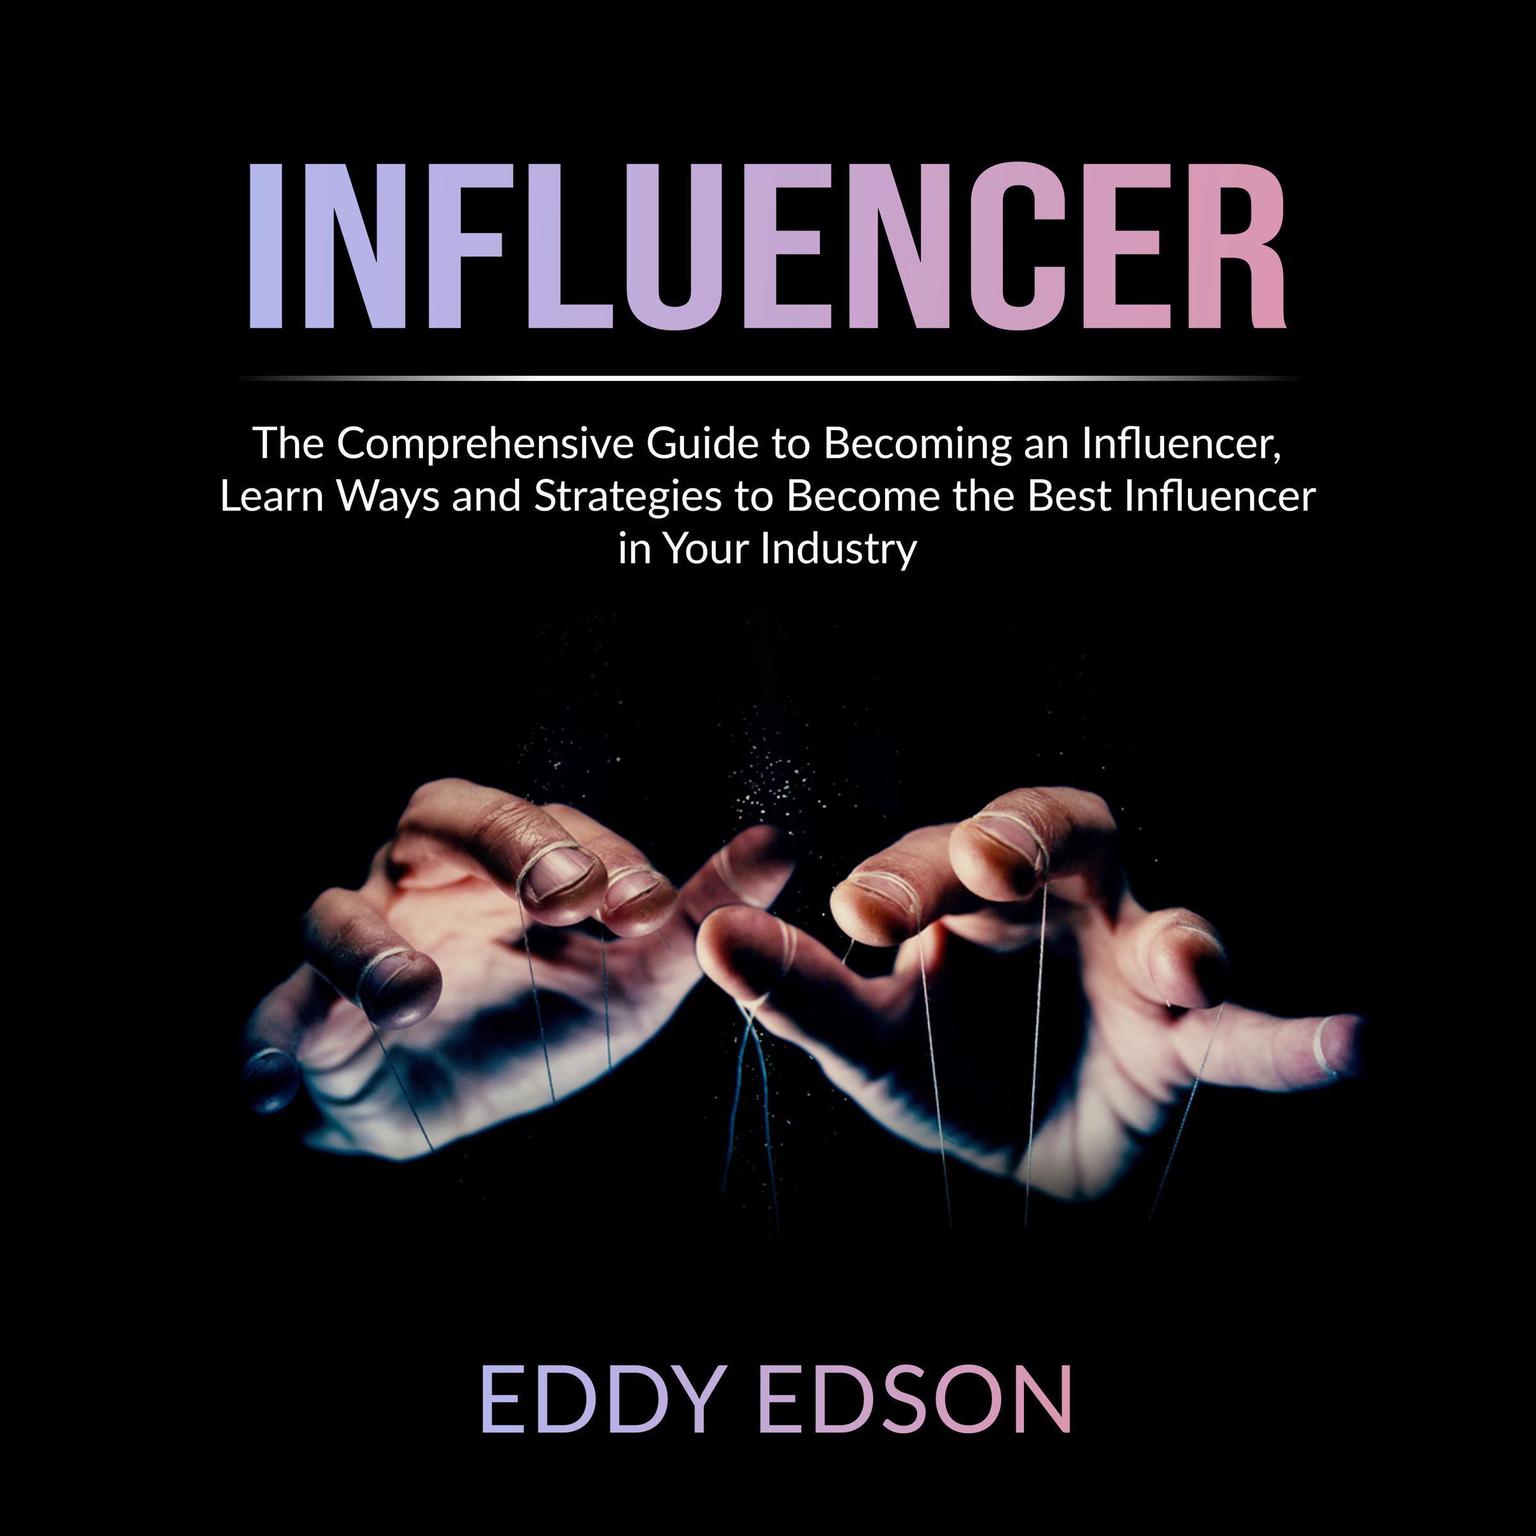 Influencer: The Comprehensive Guide to Becoming an Influencer, Learn Ways and Strategies to Become the Best Influencer in Your Industry Audiobook, by Eddy Edson